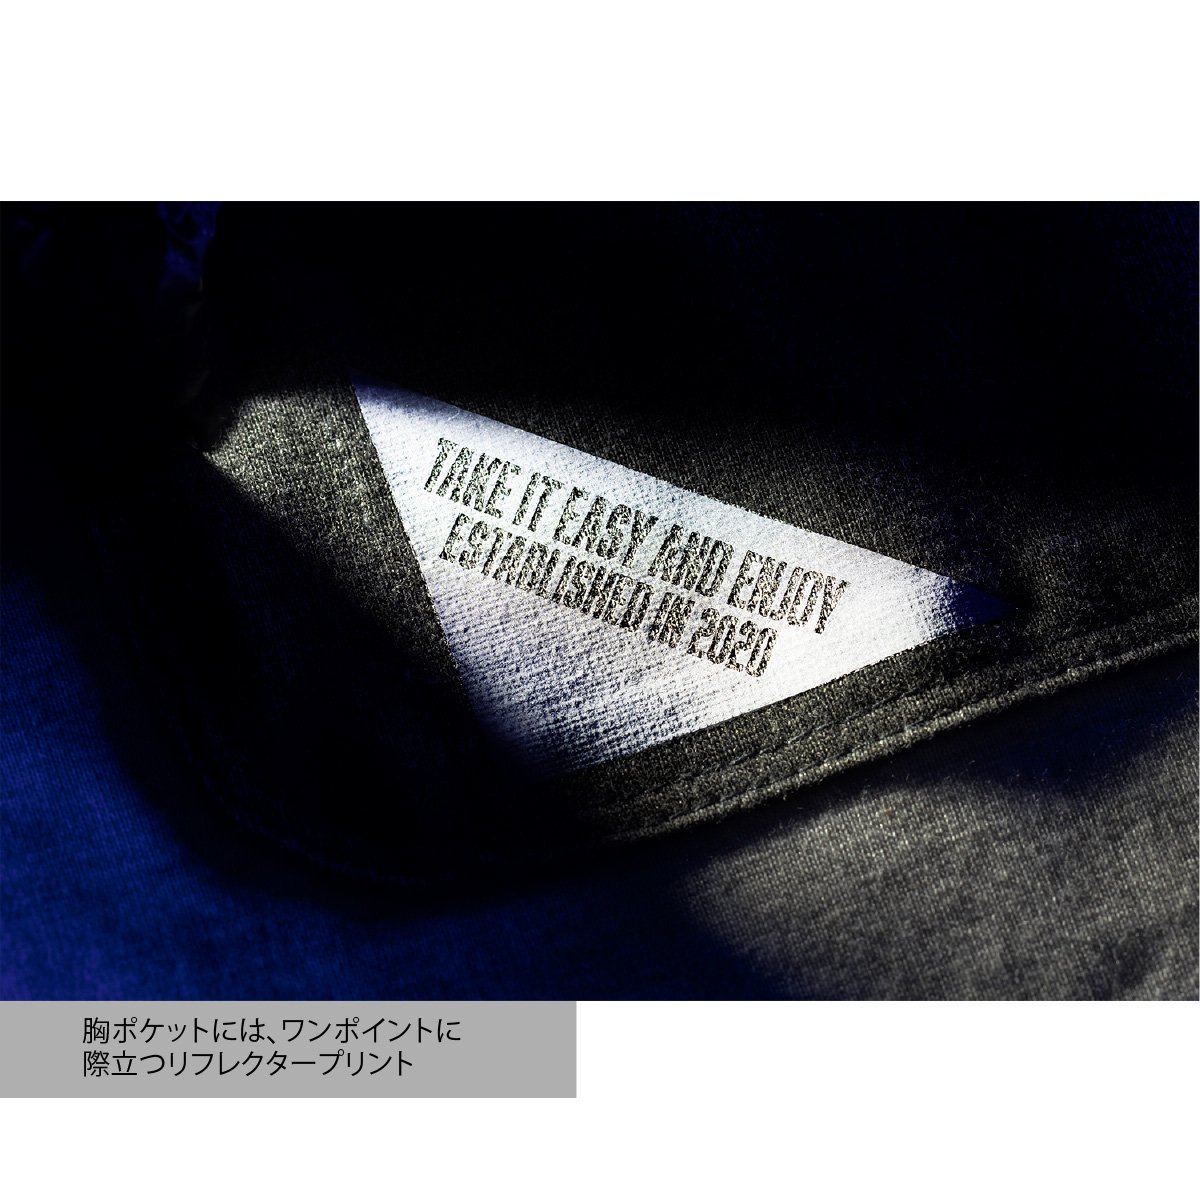 <img class='new_mark_img1' src='https://img.shop-pro.jp/img/new/icons47.gif' style='border:none;display:inline;margin:0px;padding:0px;width:auto;' />3A Back Logo T-Shirt